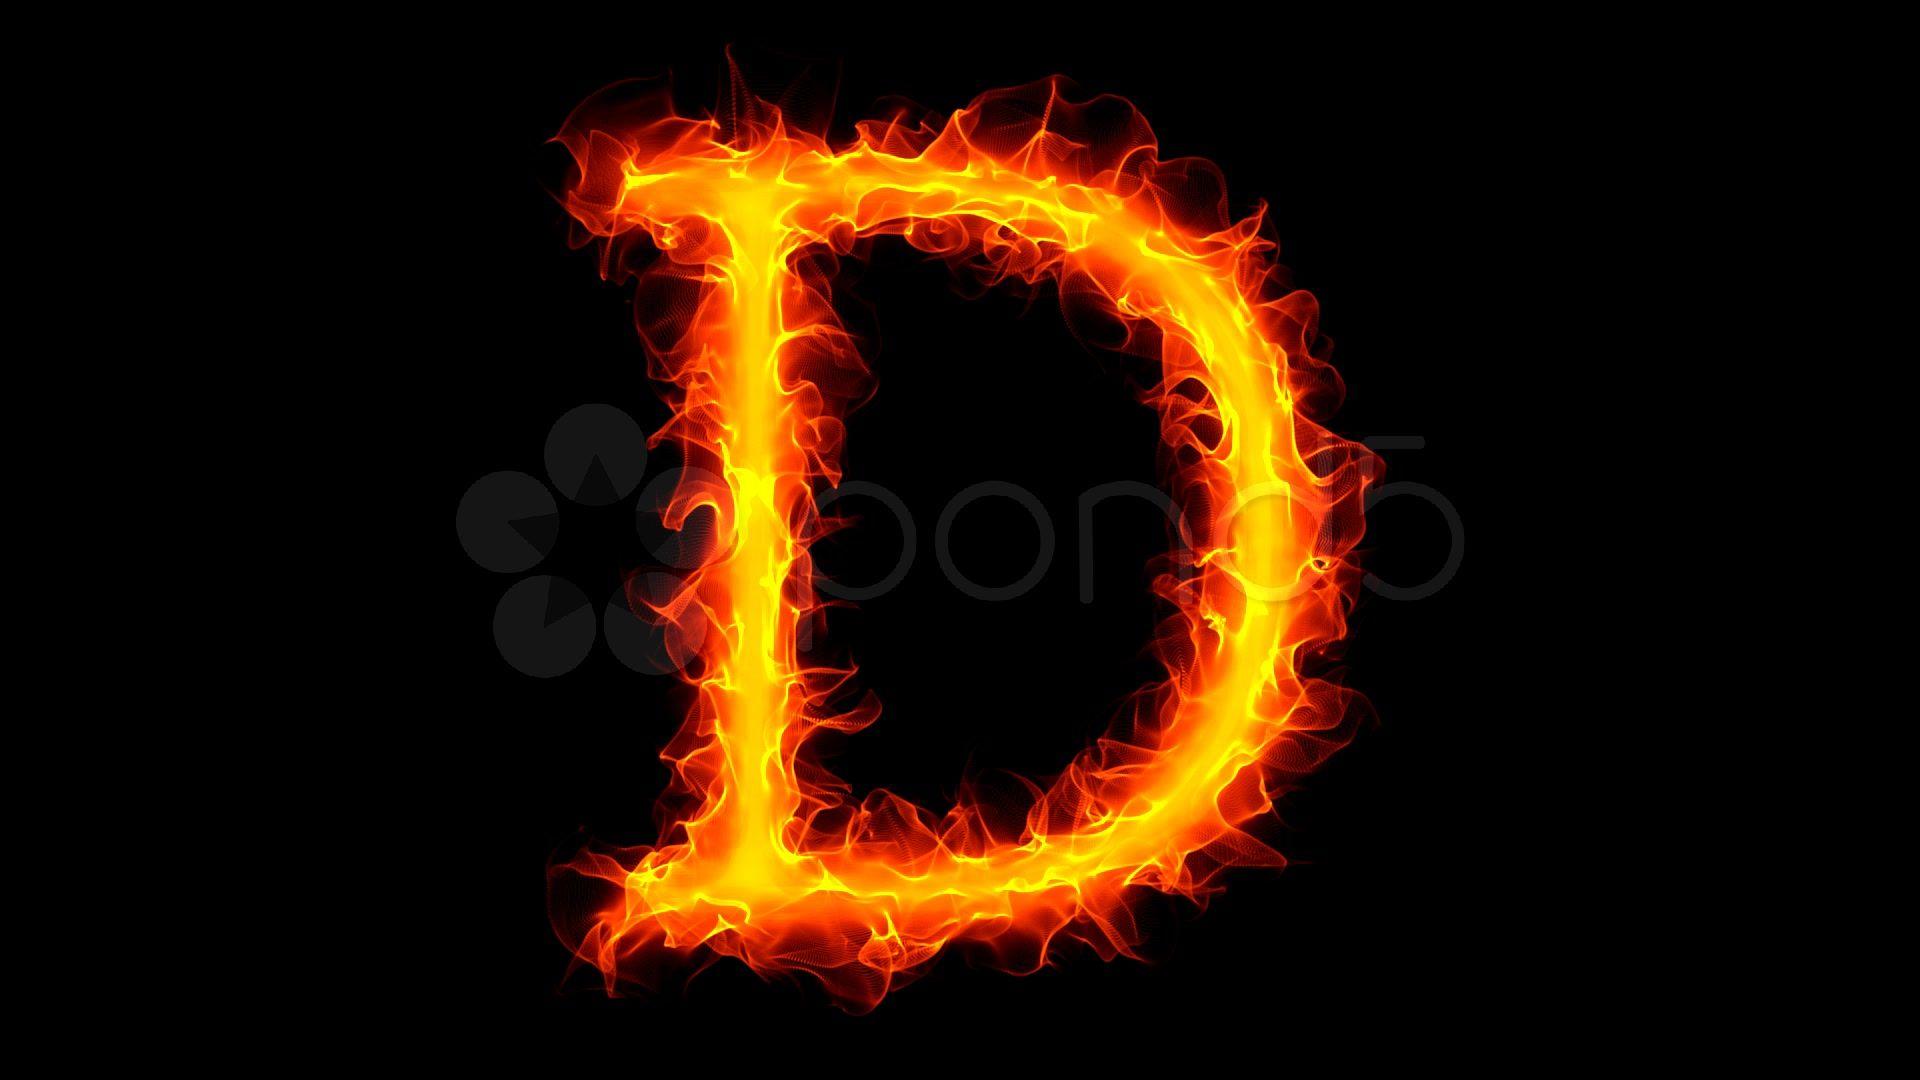 Letter d Stock Photos, Royalty Free Letter d Images | Depositphotos